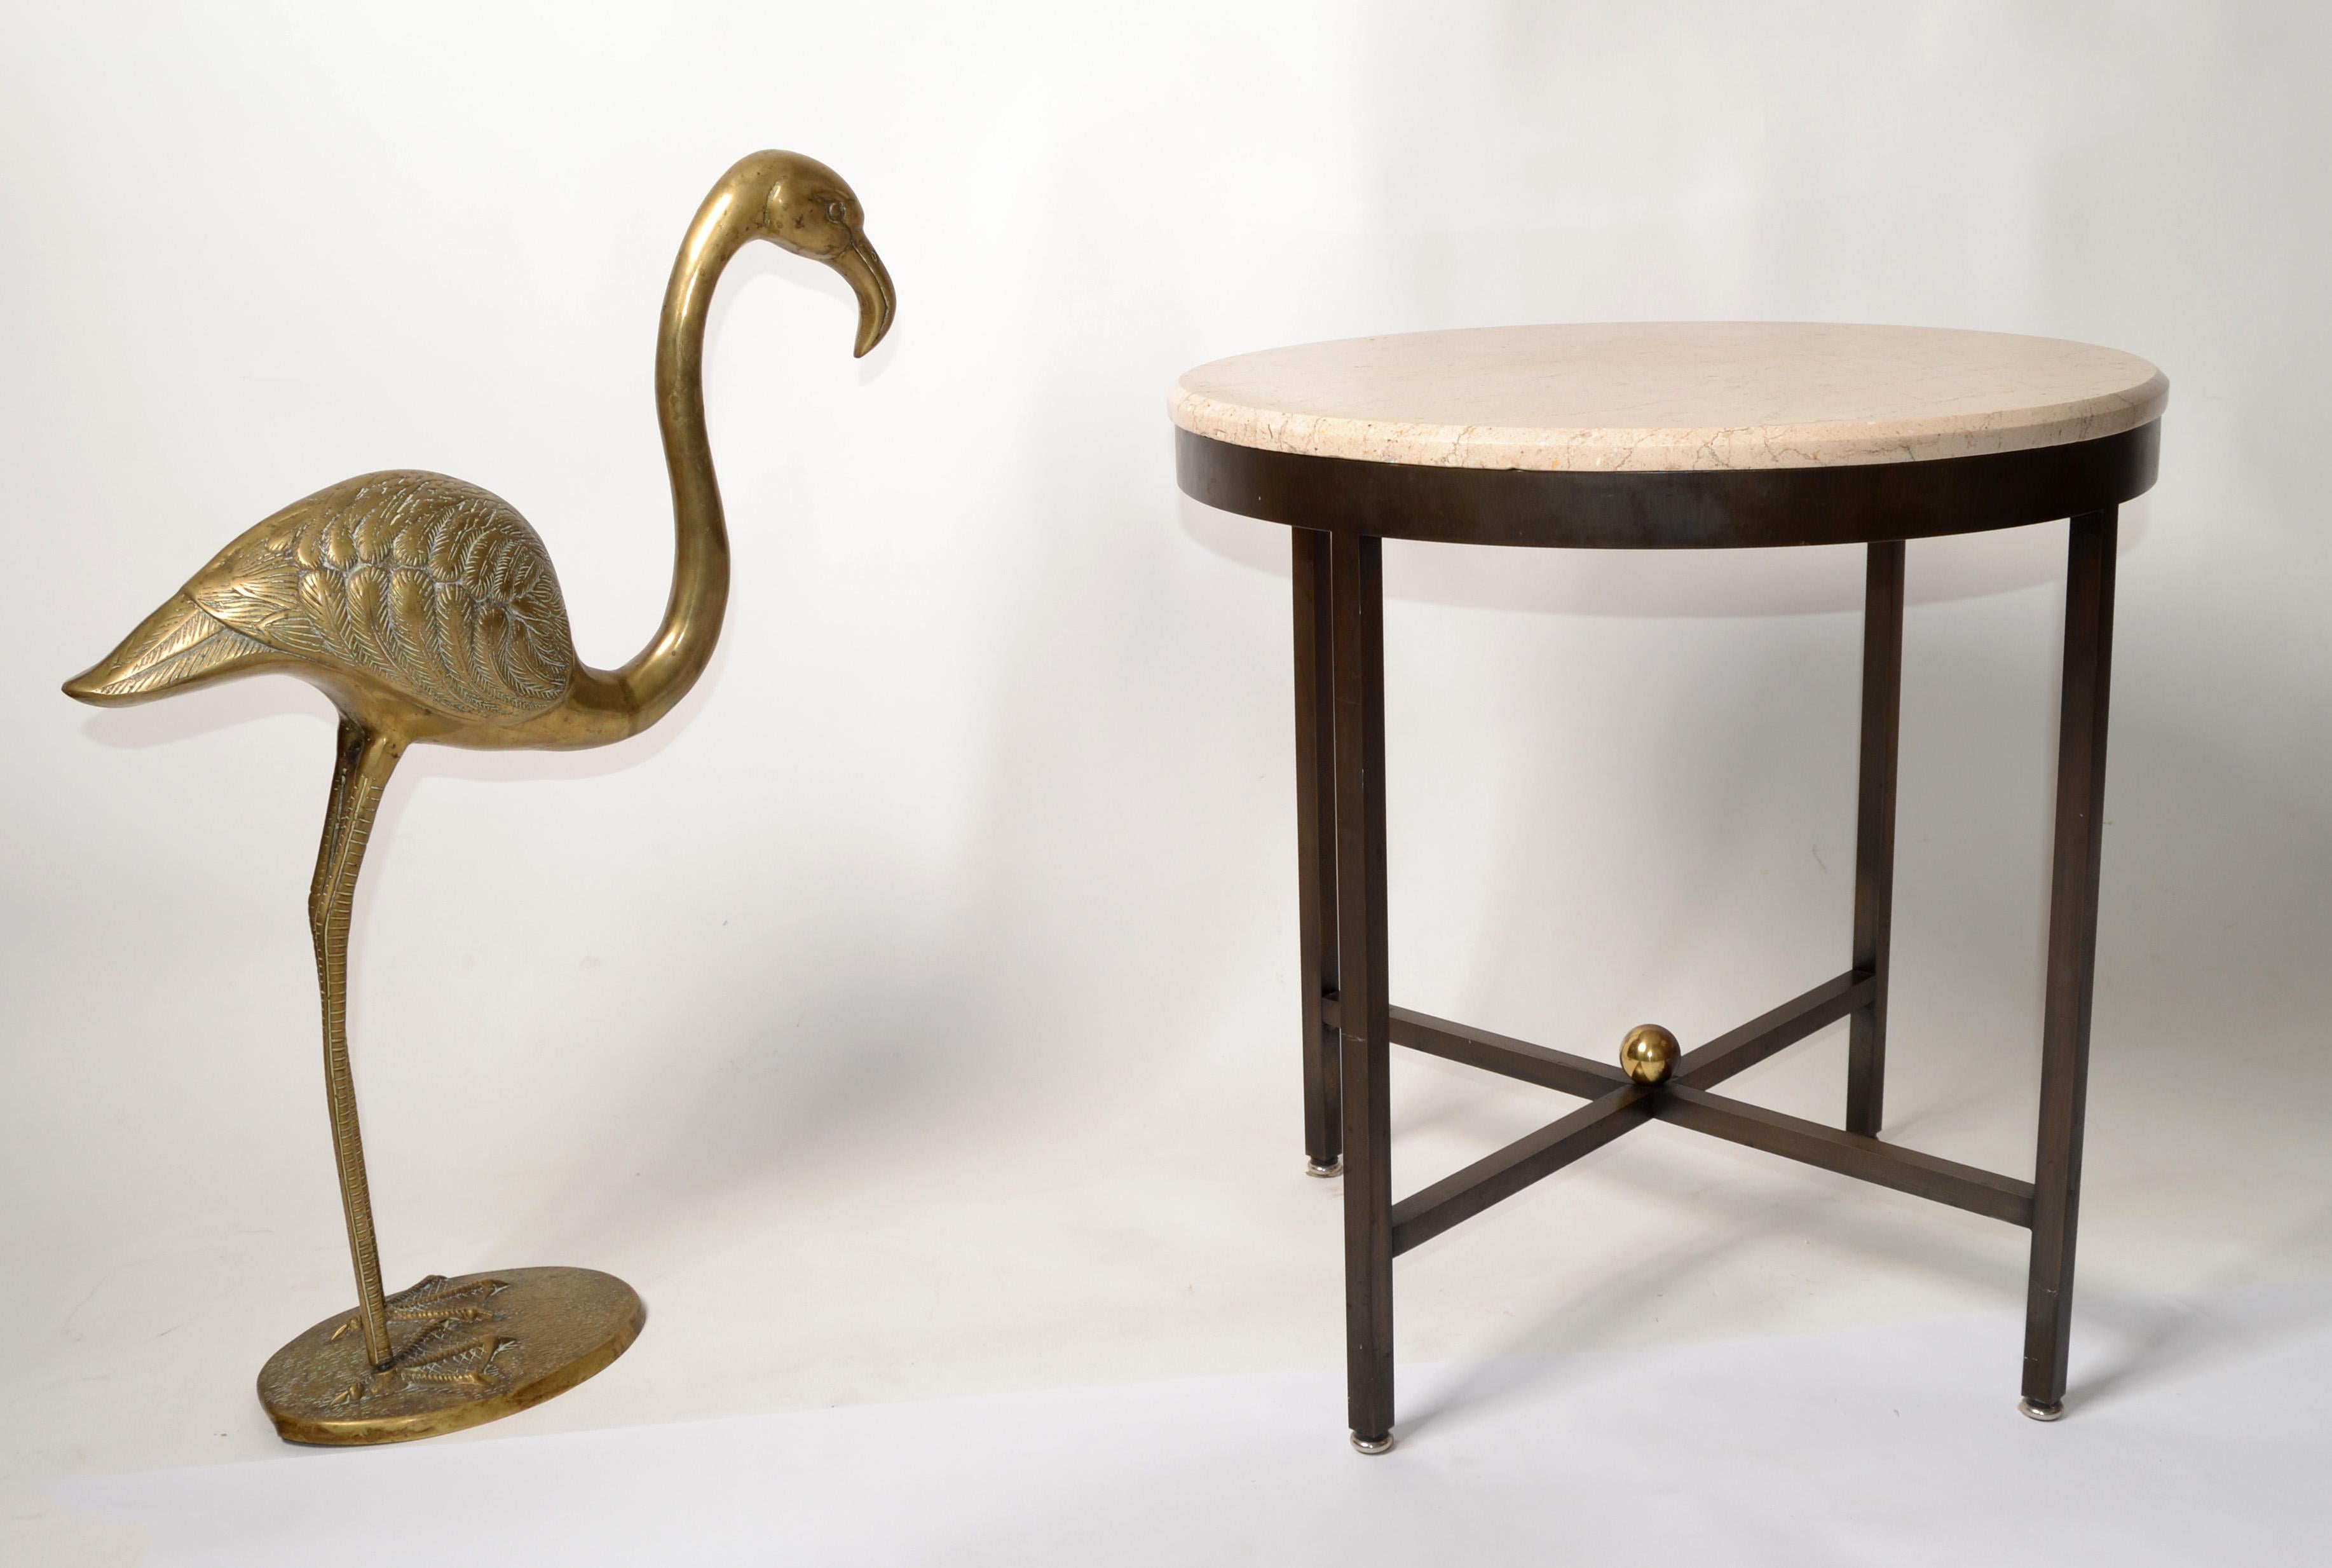 Hand-Carved Solid Brass Carved Flamingo Life-Size Animal Sculpture Outdoor Indoor Asian 1960 For Sale